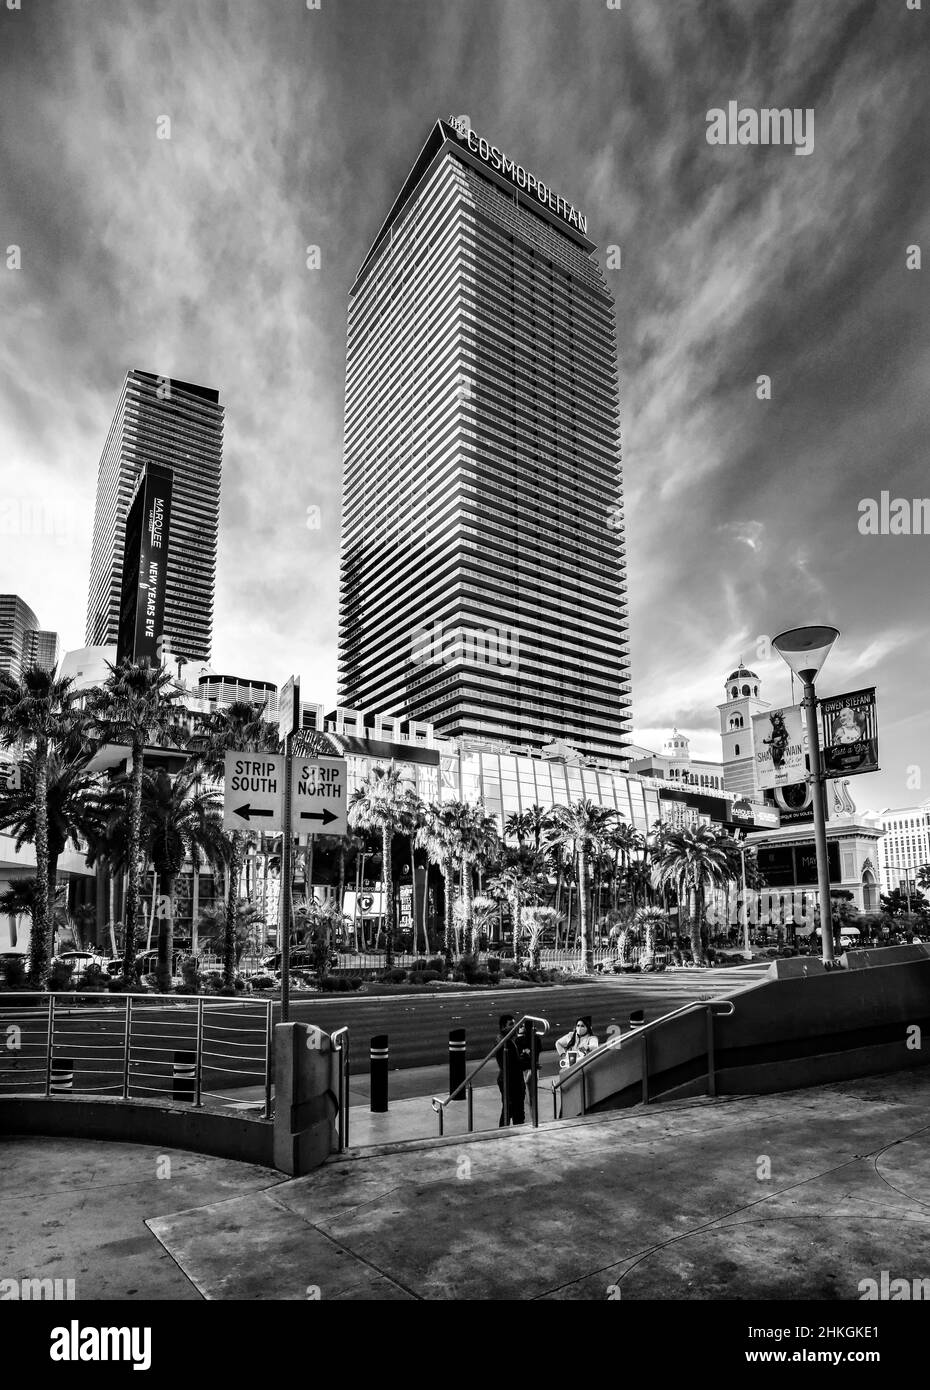 An artistic shot in Black and White of the Cosmopolitan Resort and Casino on the Vegas Strip, Las Vegas, Nevada. Stock Photo